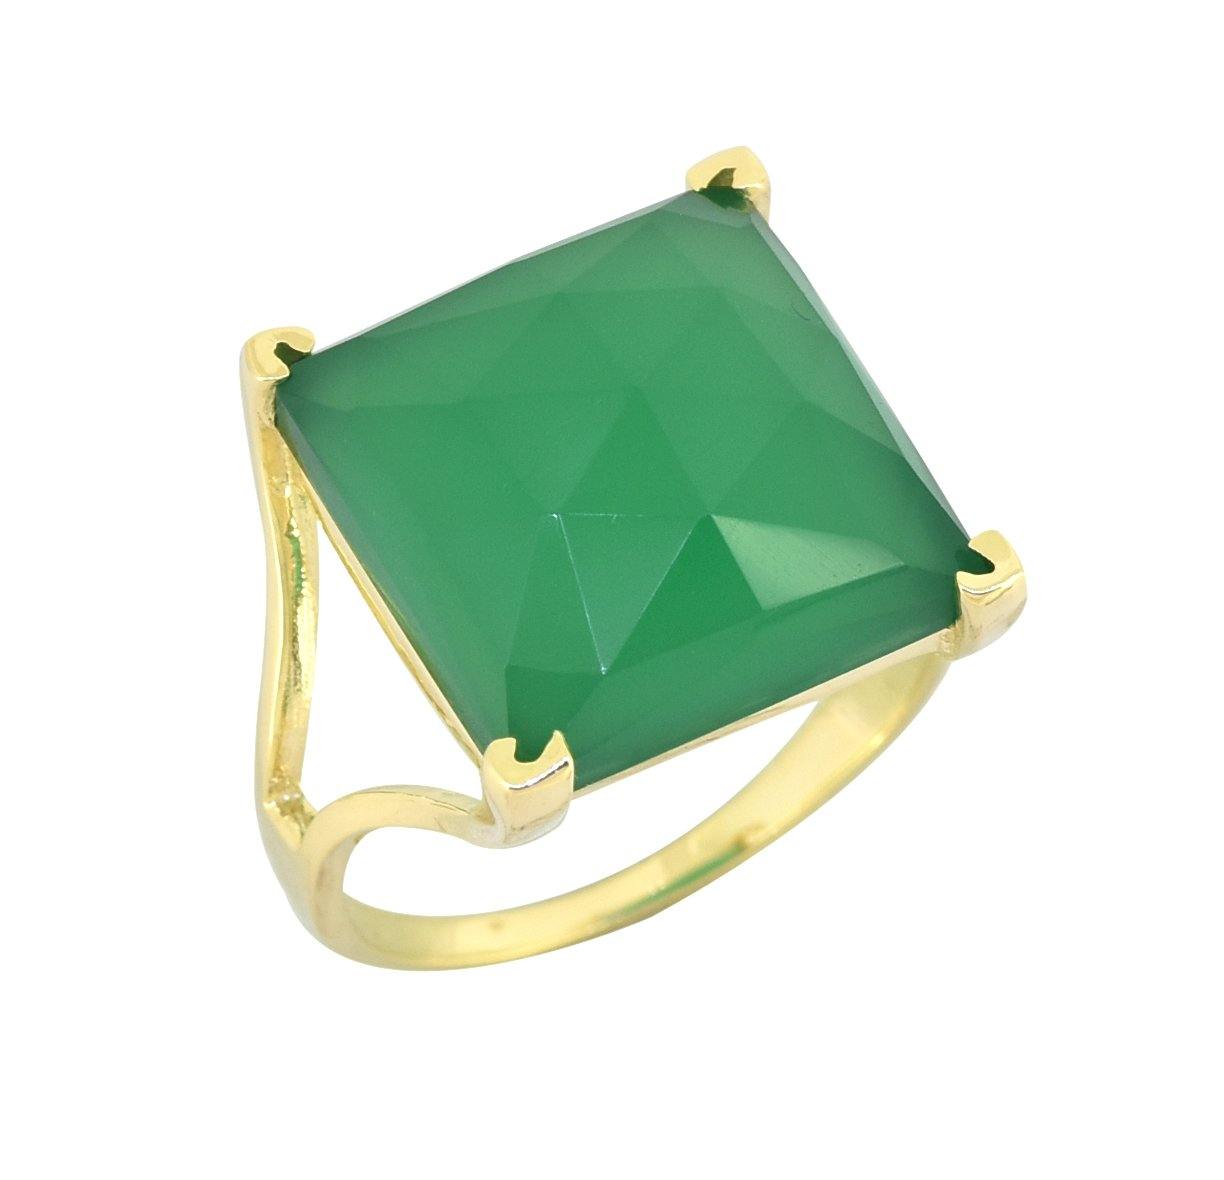 Green Onyx Solid 925 Sterling Silver Gold Plated Statement Ring Jewelry - YoTreasure